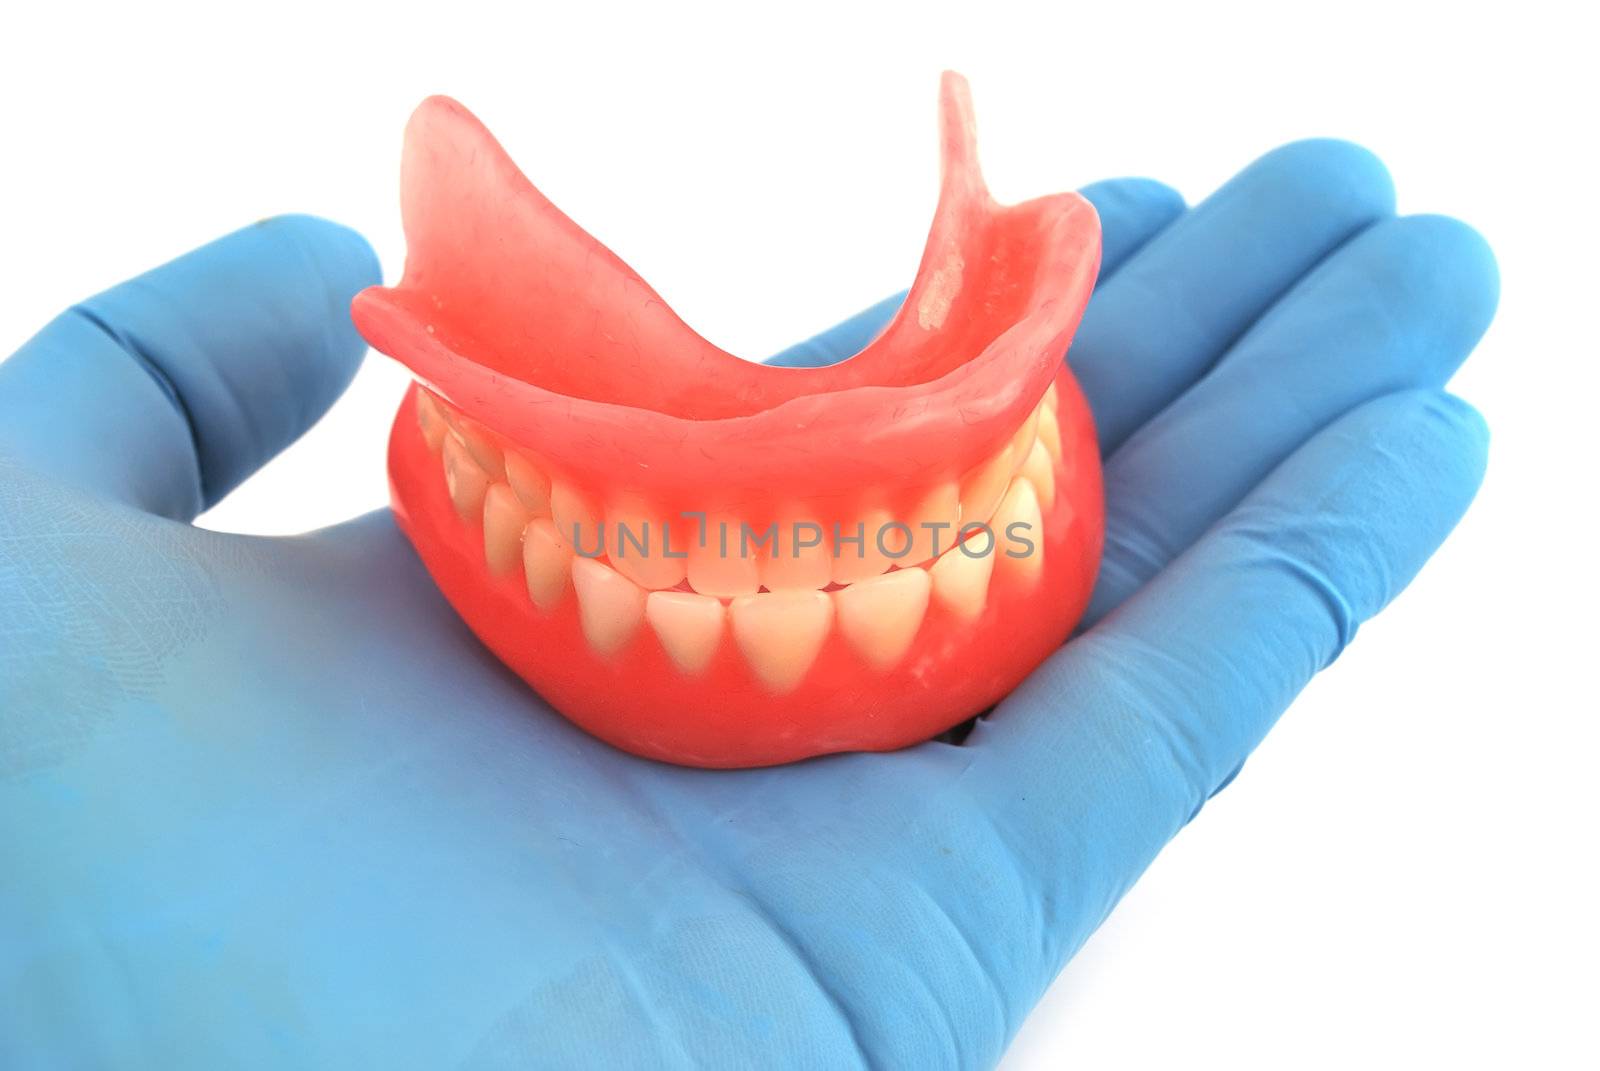 dentures in his hand on a white background